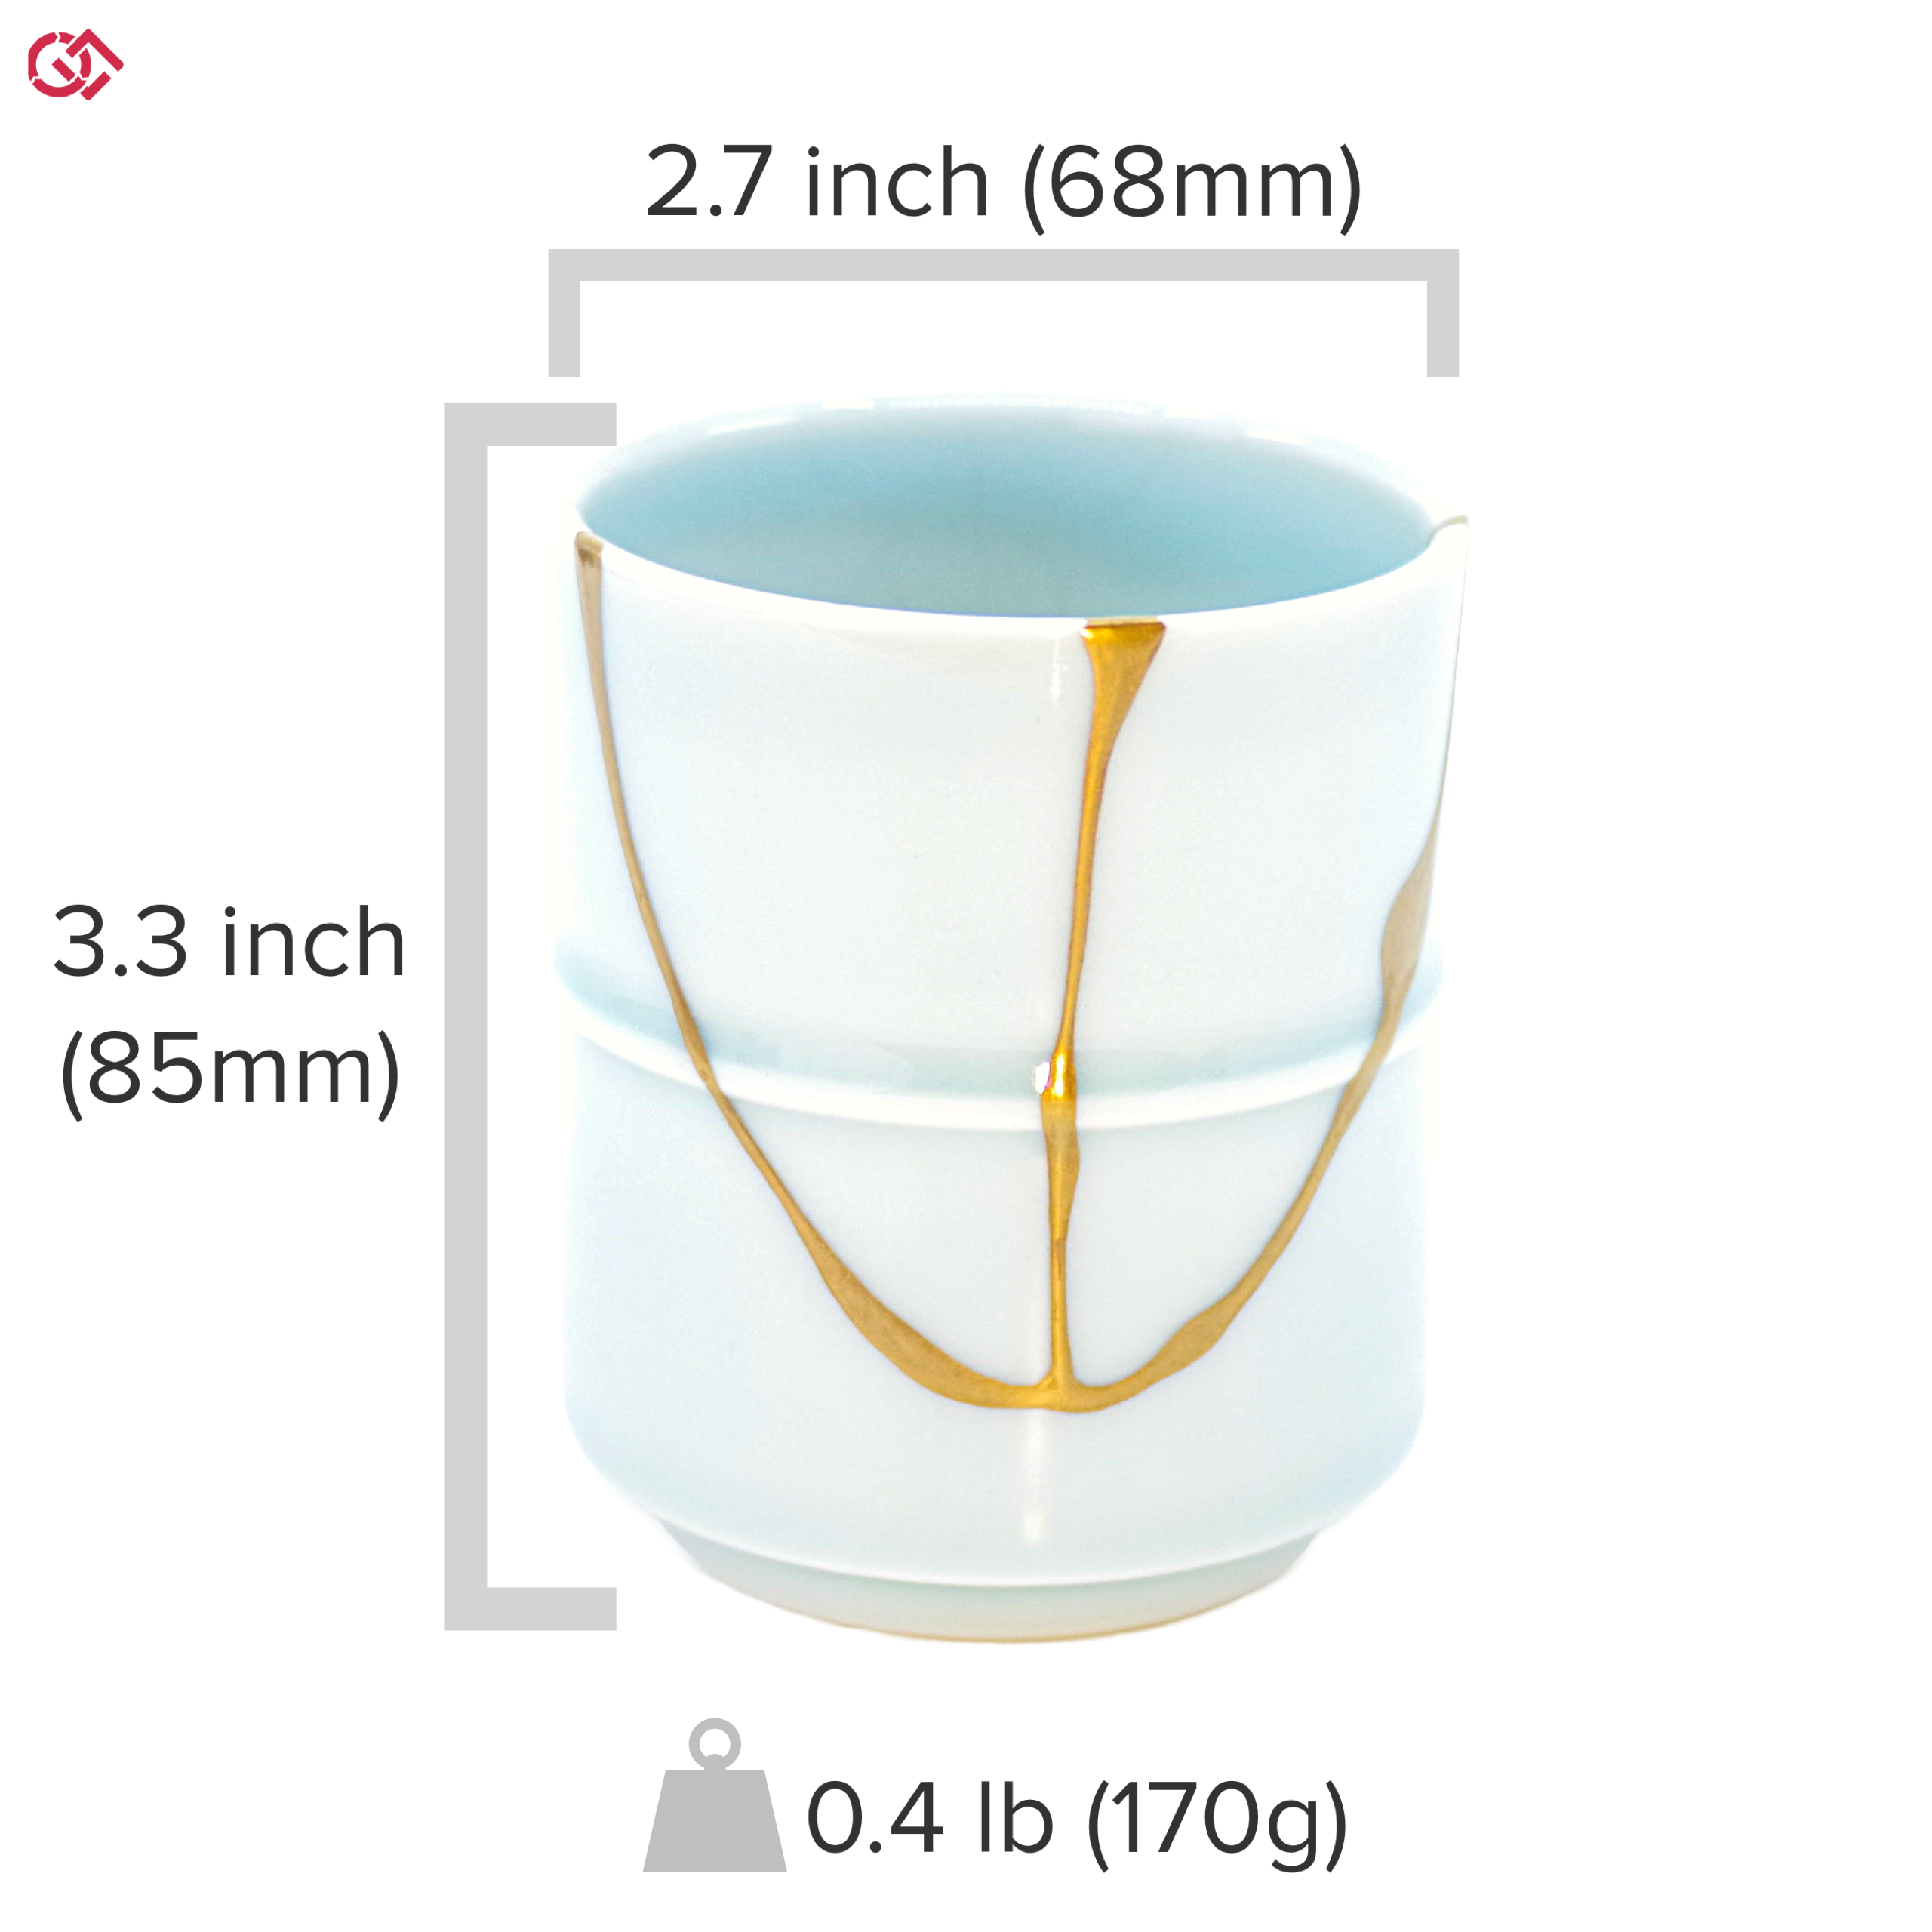 Authentic Kintsugi pottery with diameter and height description